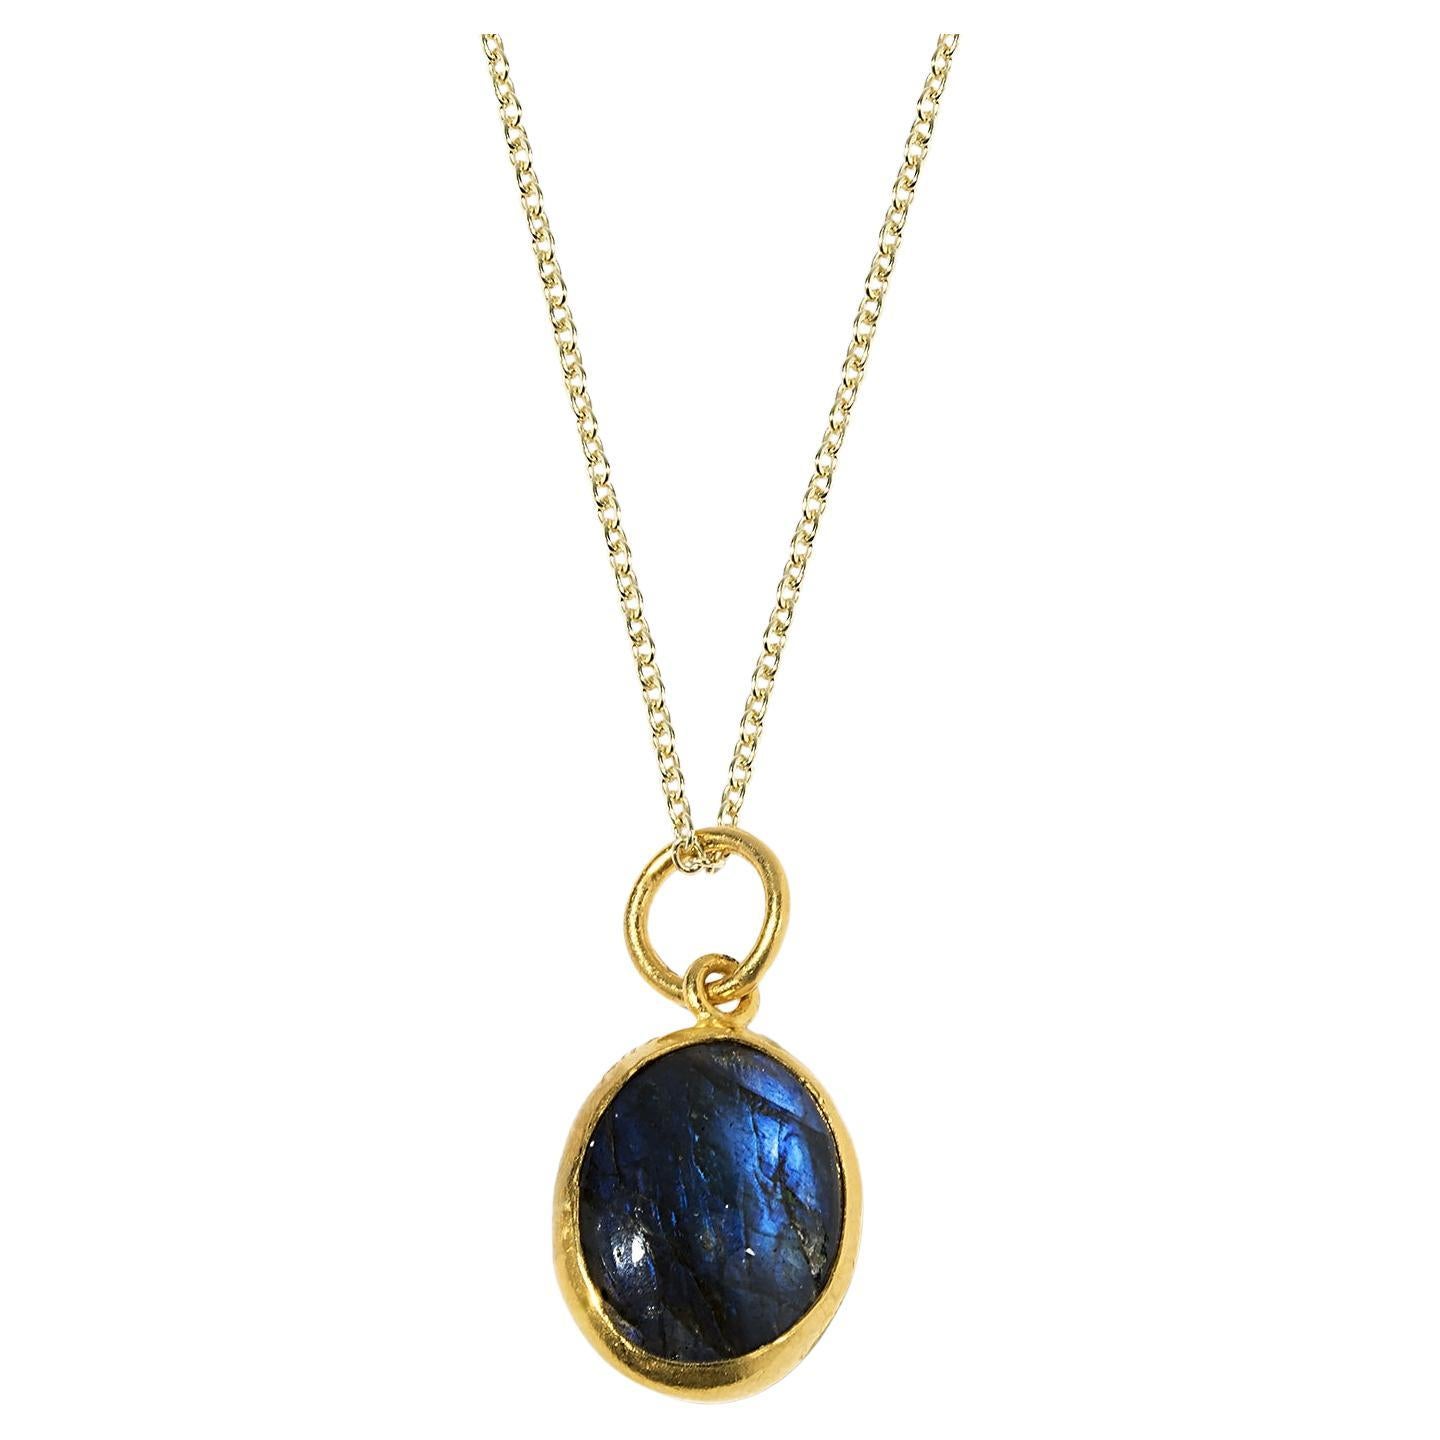 Smooth, Oval 5.45 Ct Labradorite Charm Pendant Necklace, 24kt Solid Gold For Sale